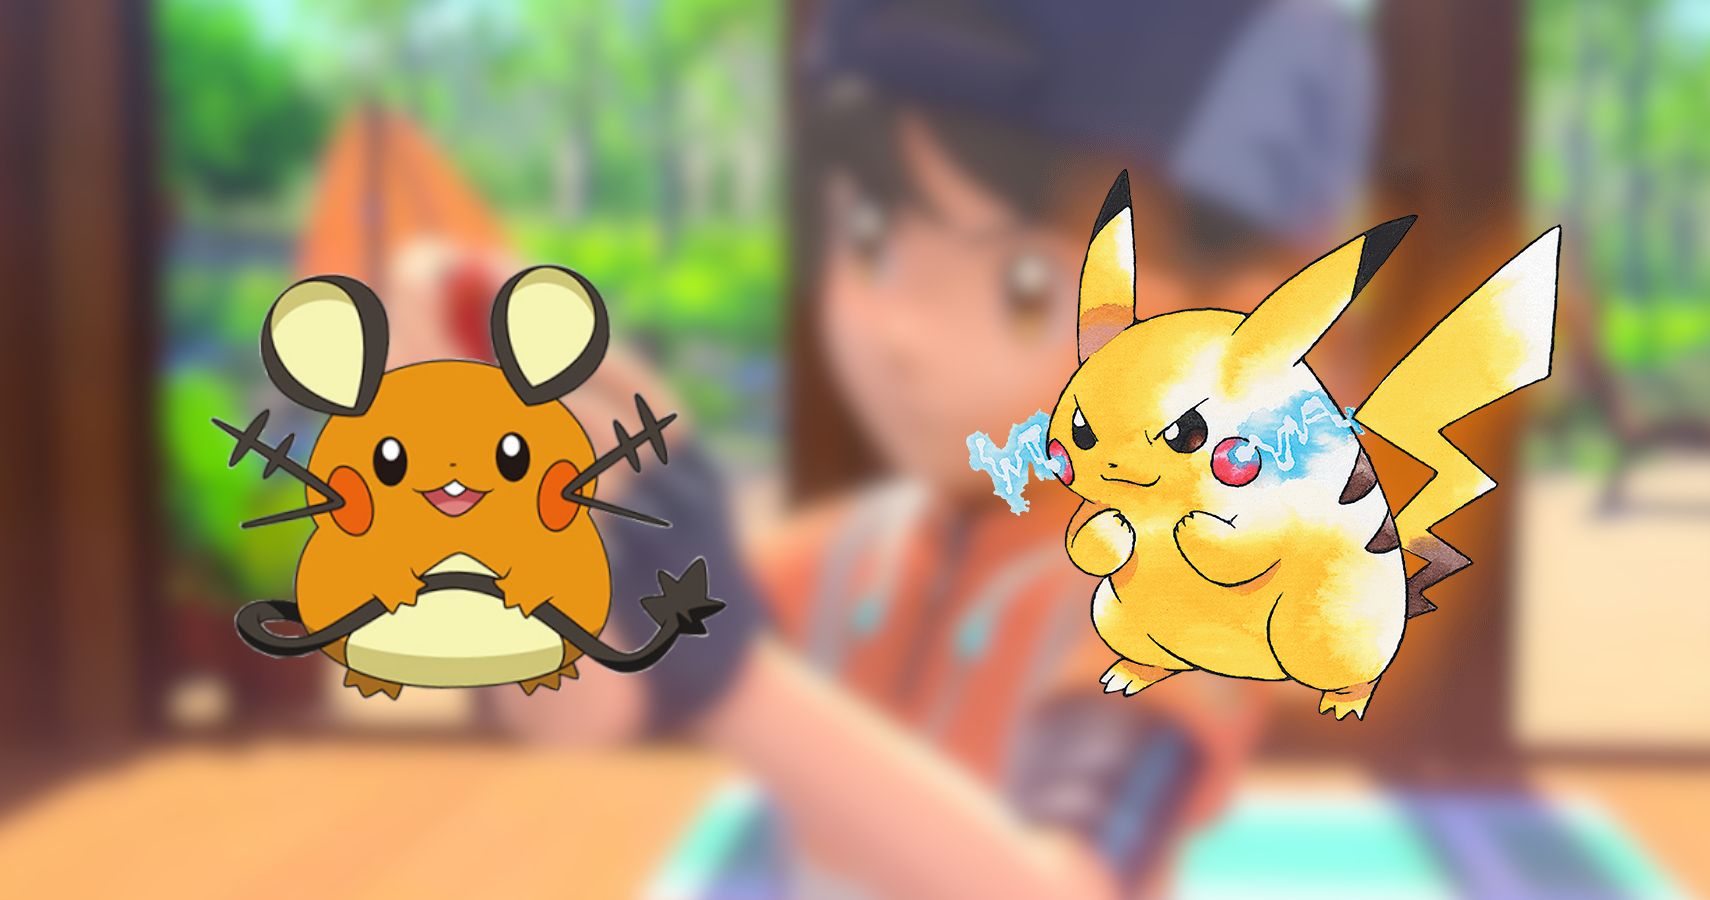 These Are The 30 Most Popular Pokemon According To Fans in Japan